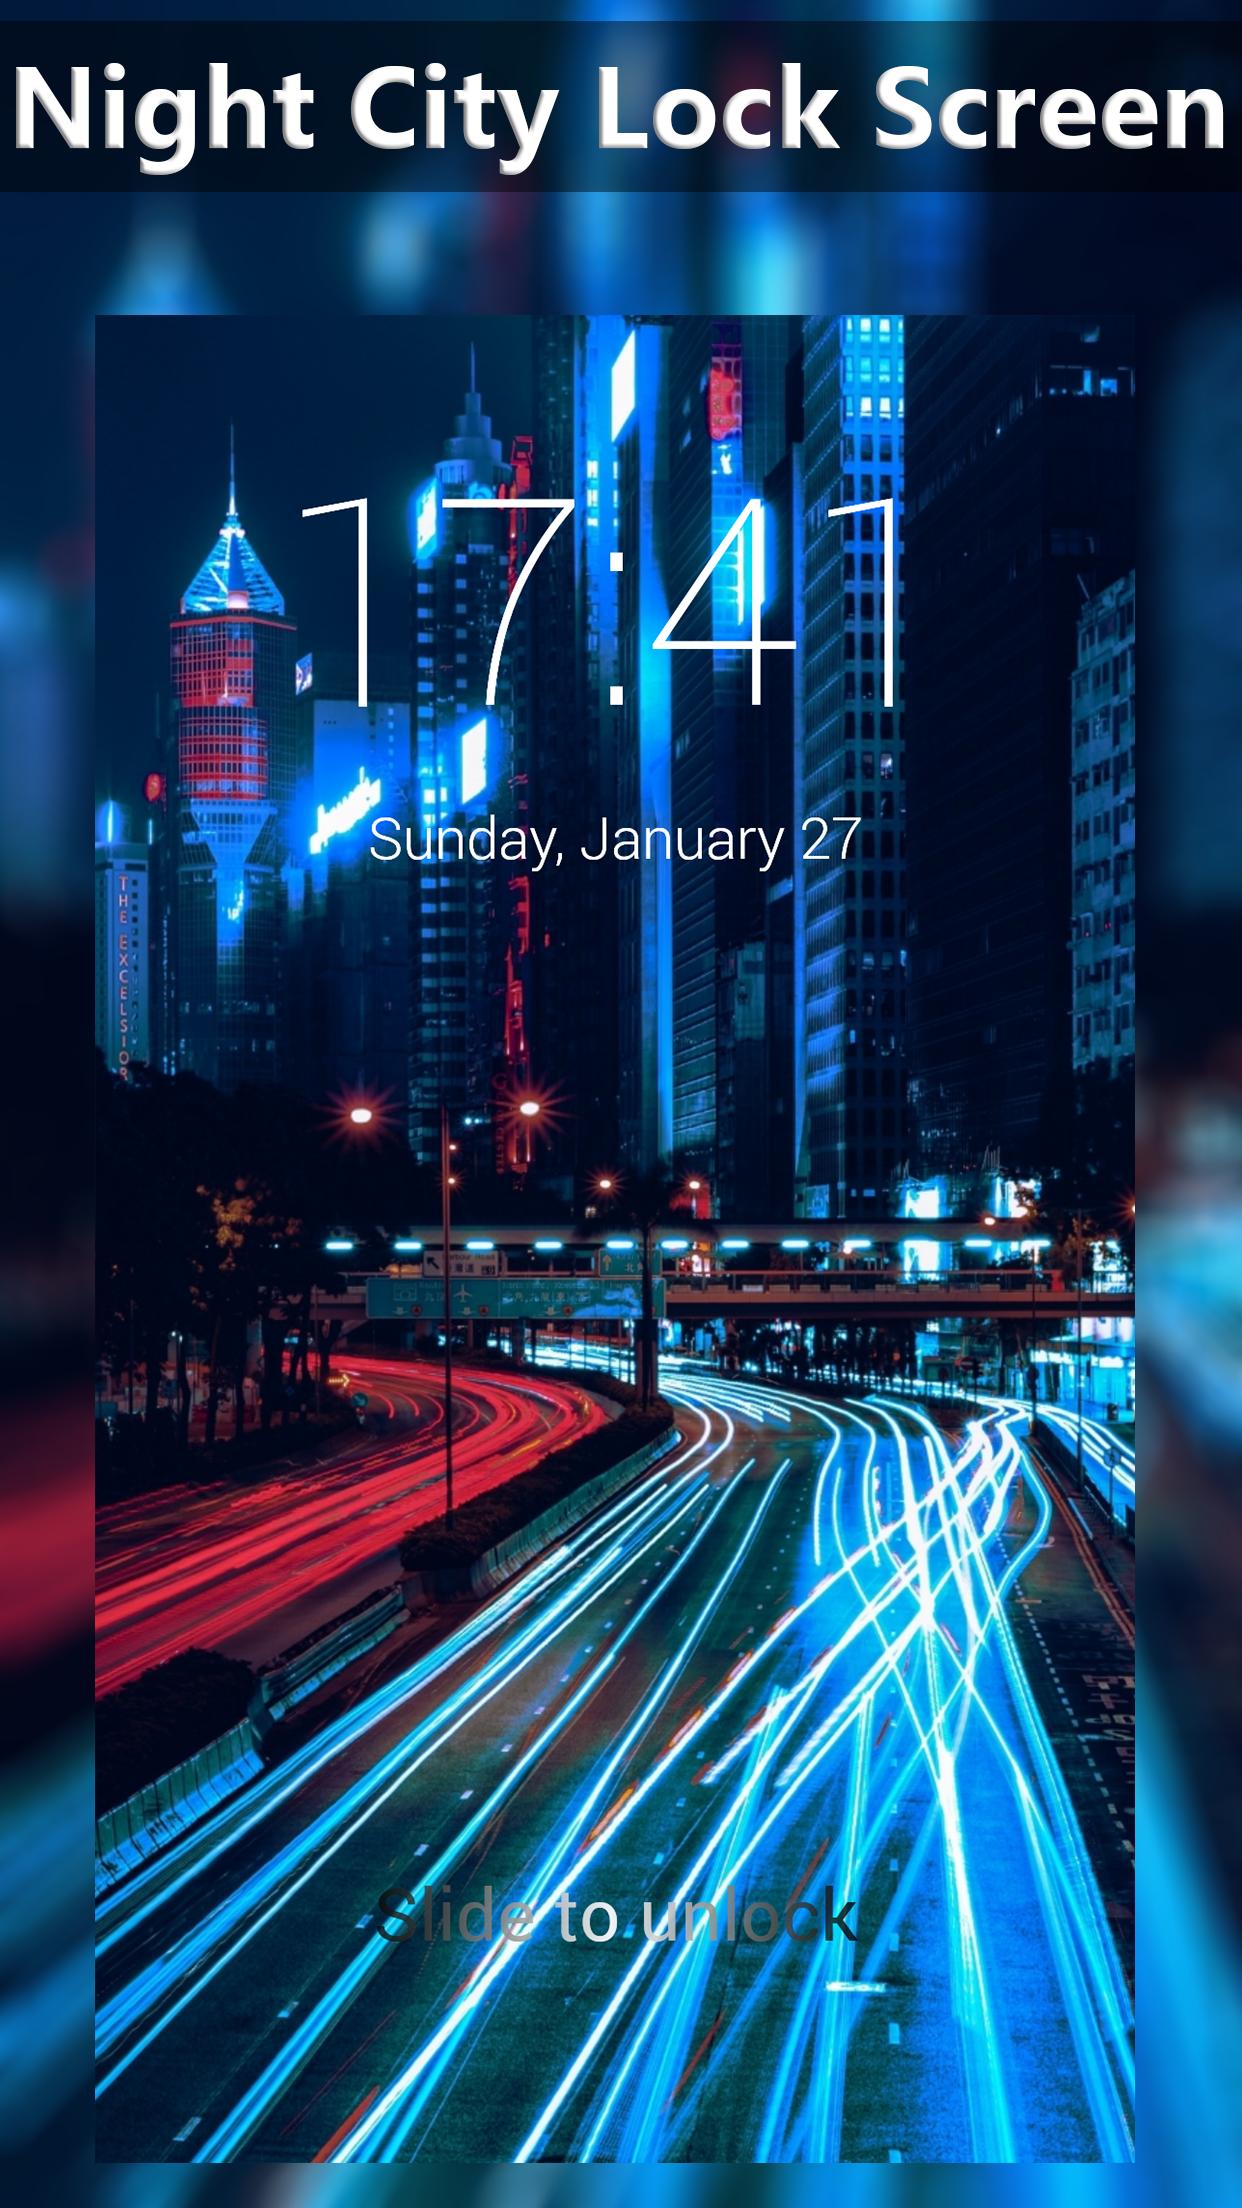 Lock Screen Wallpaper Pictures  Download Free Images on Unsplash